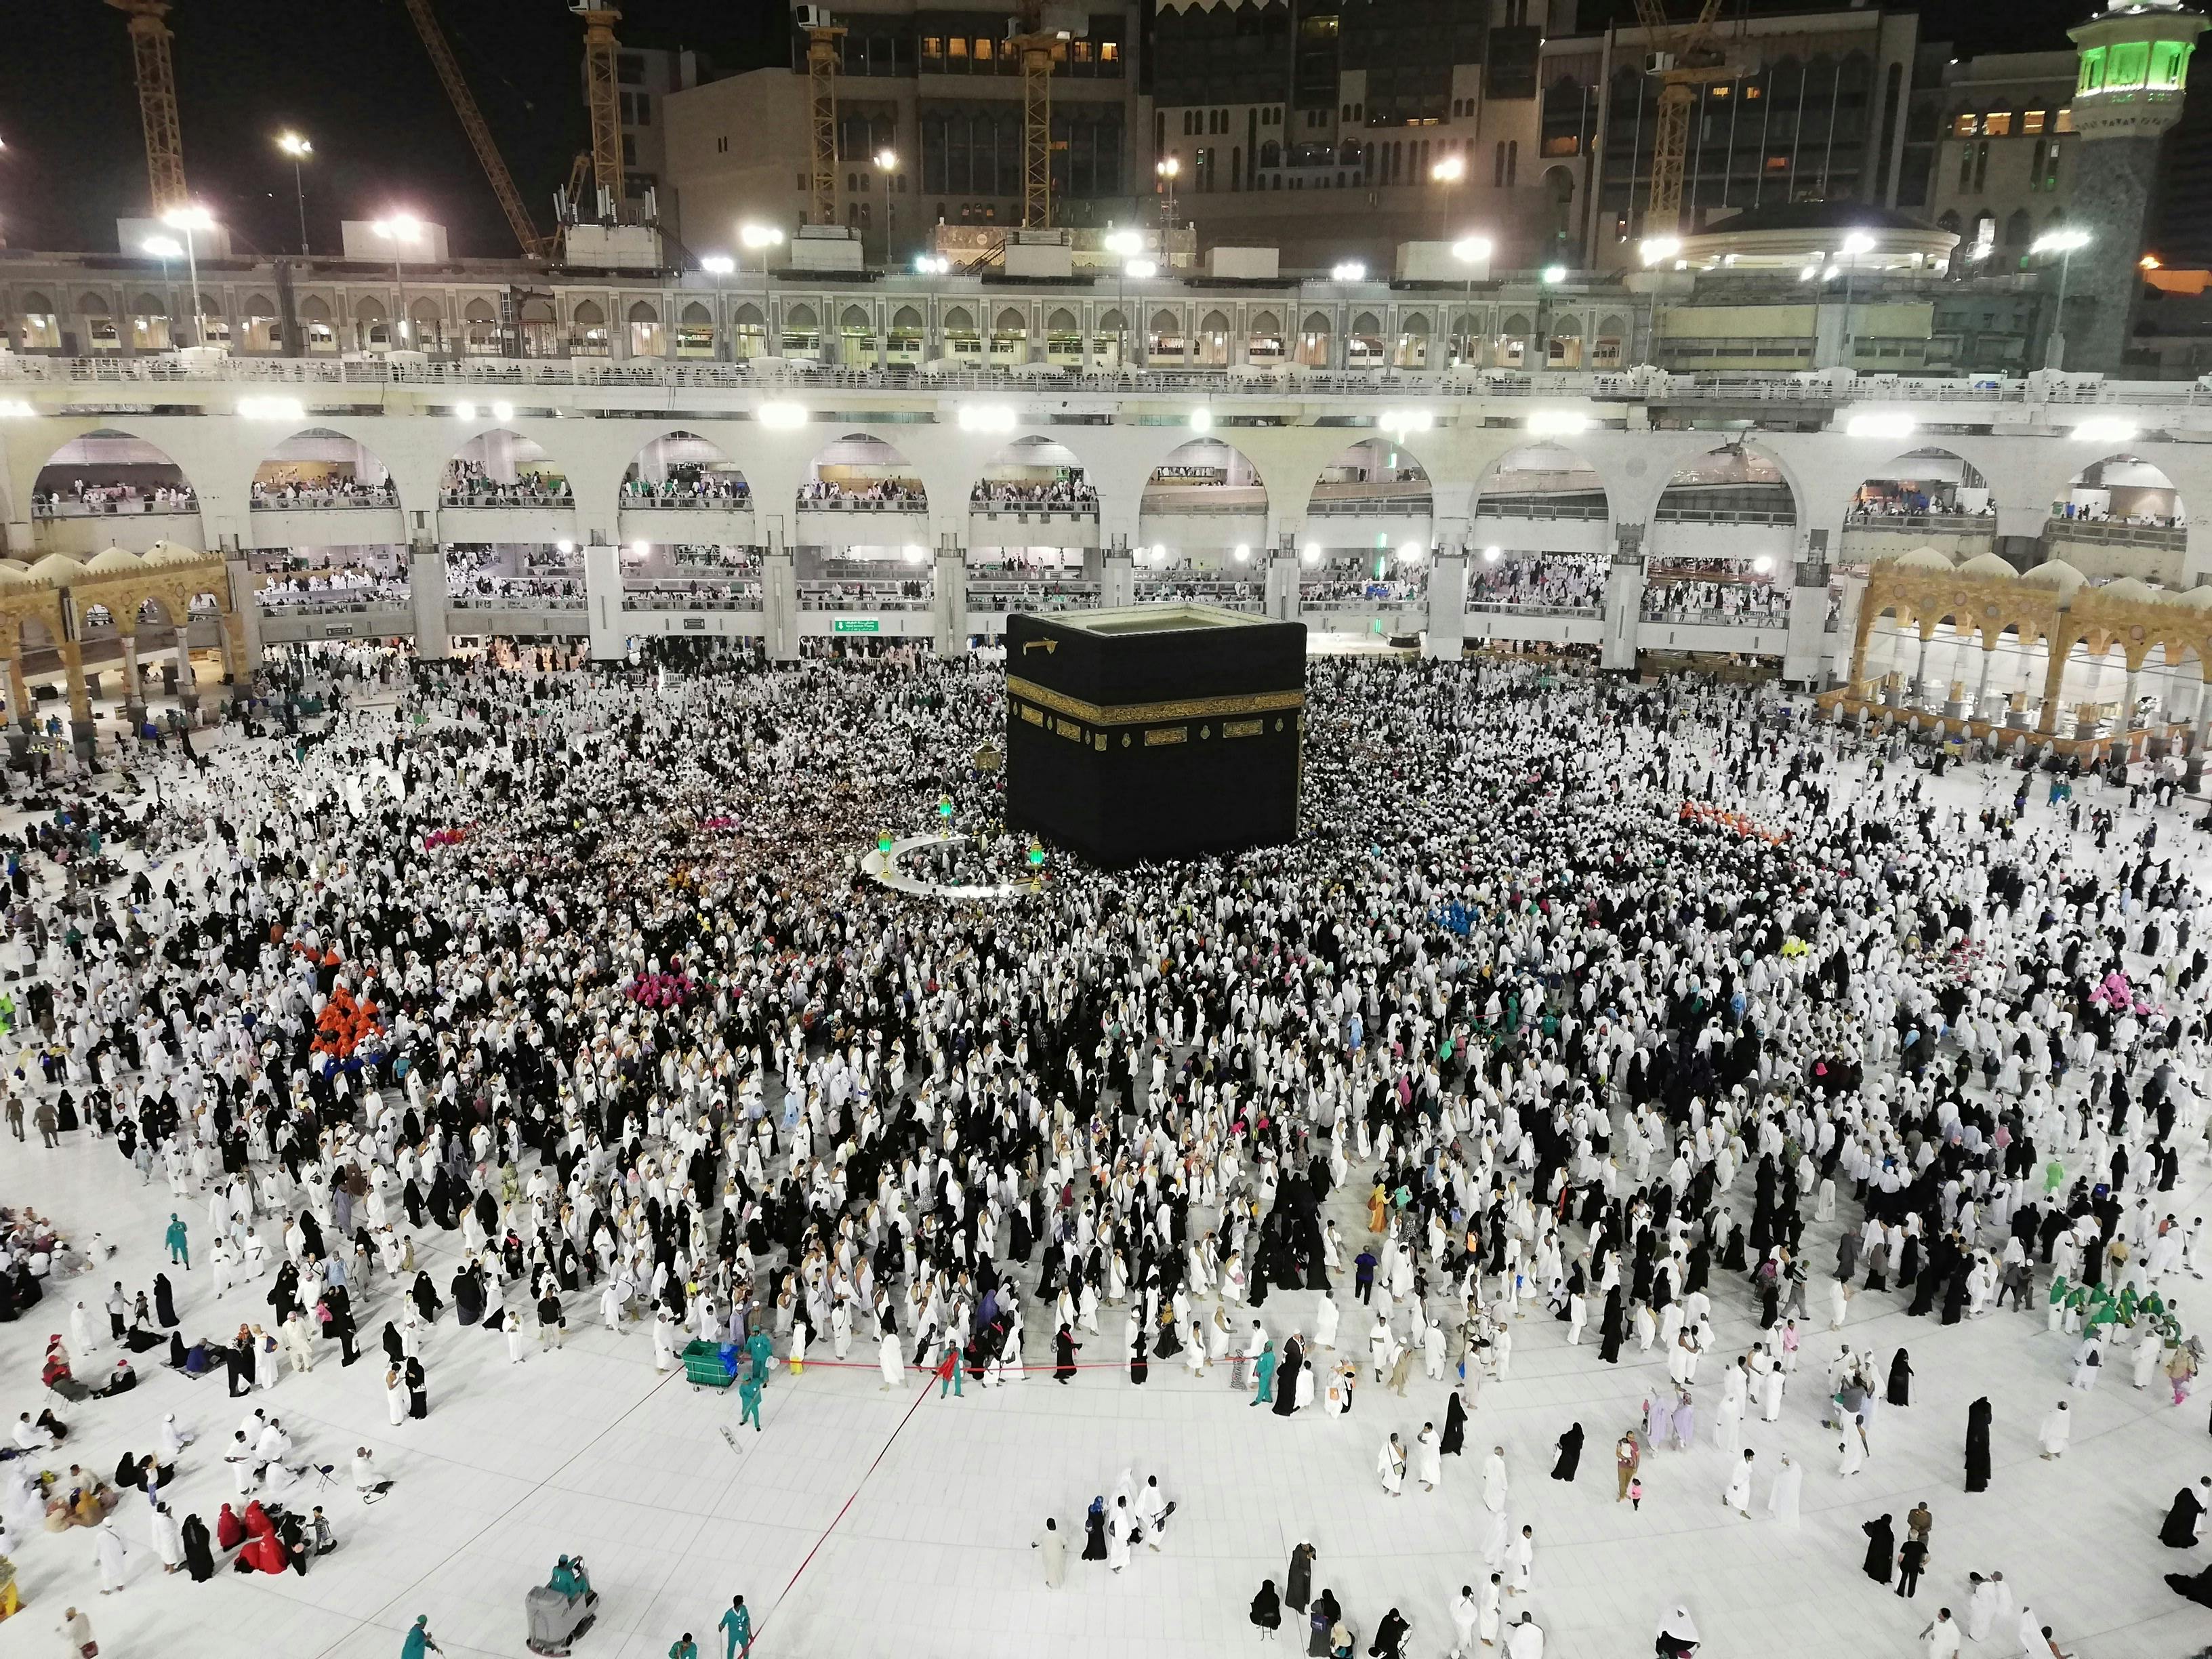 Kaaba Mecca Background Images HD Pictures and Wallpaper For Free Download   Pngtree